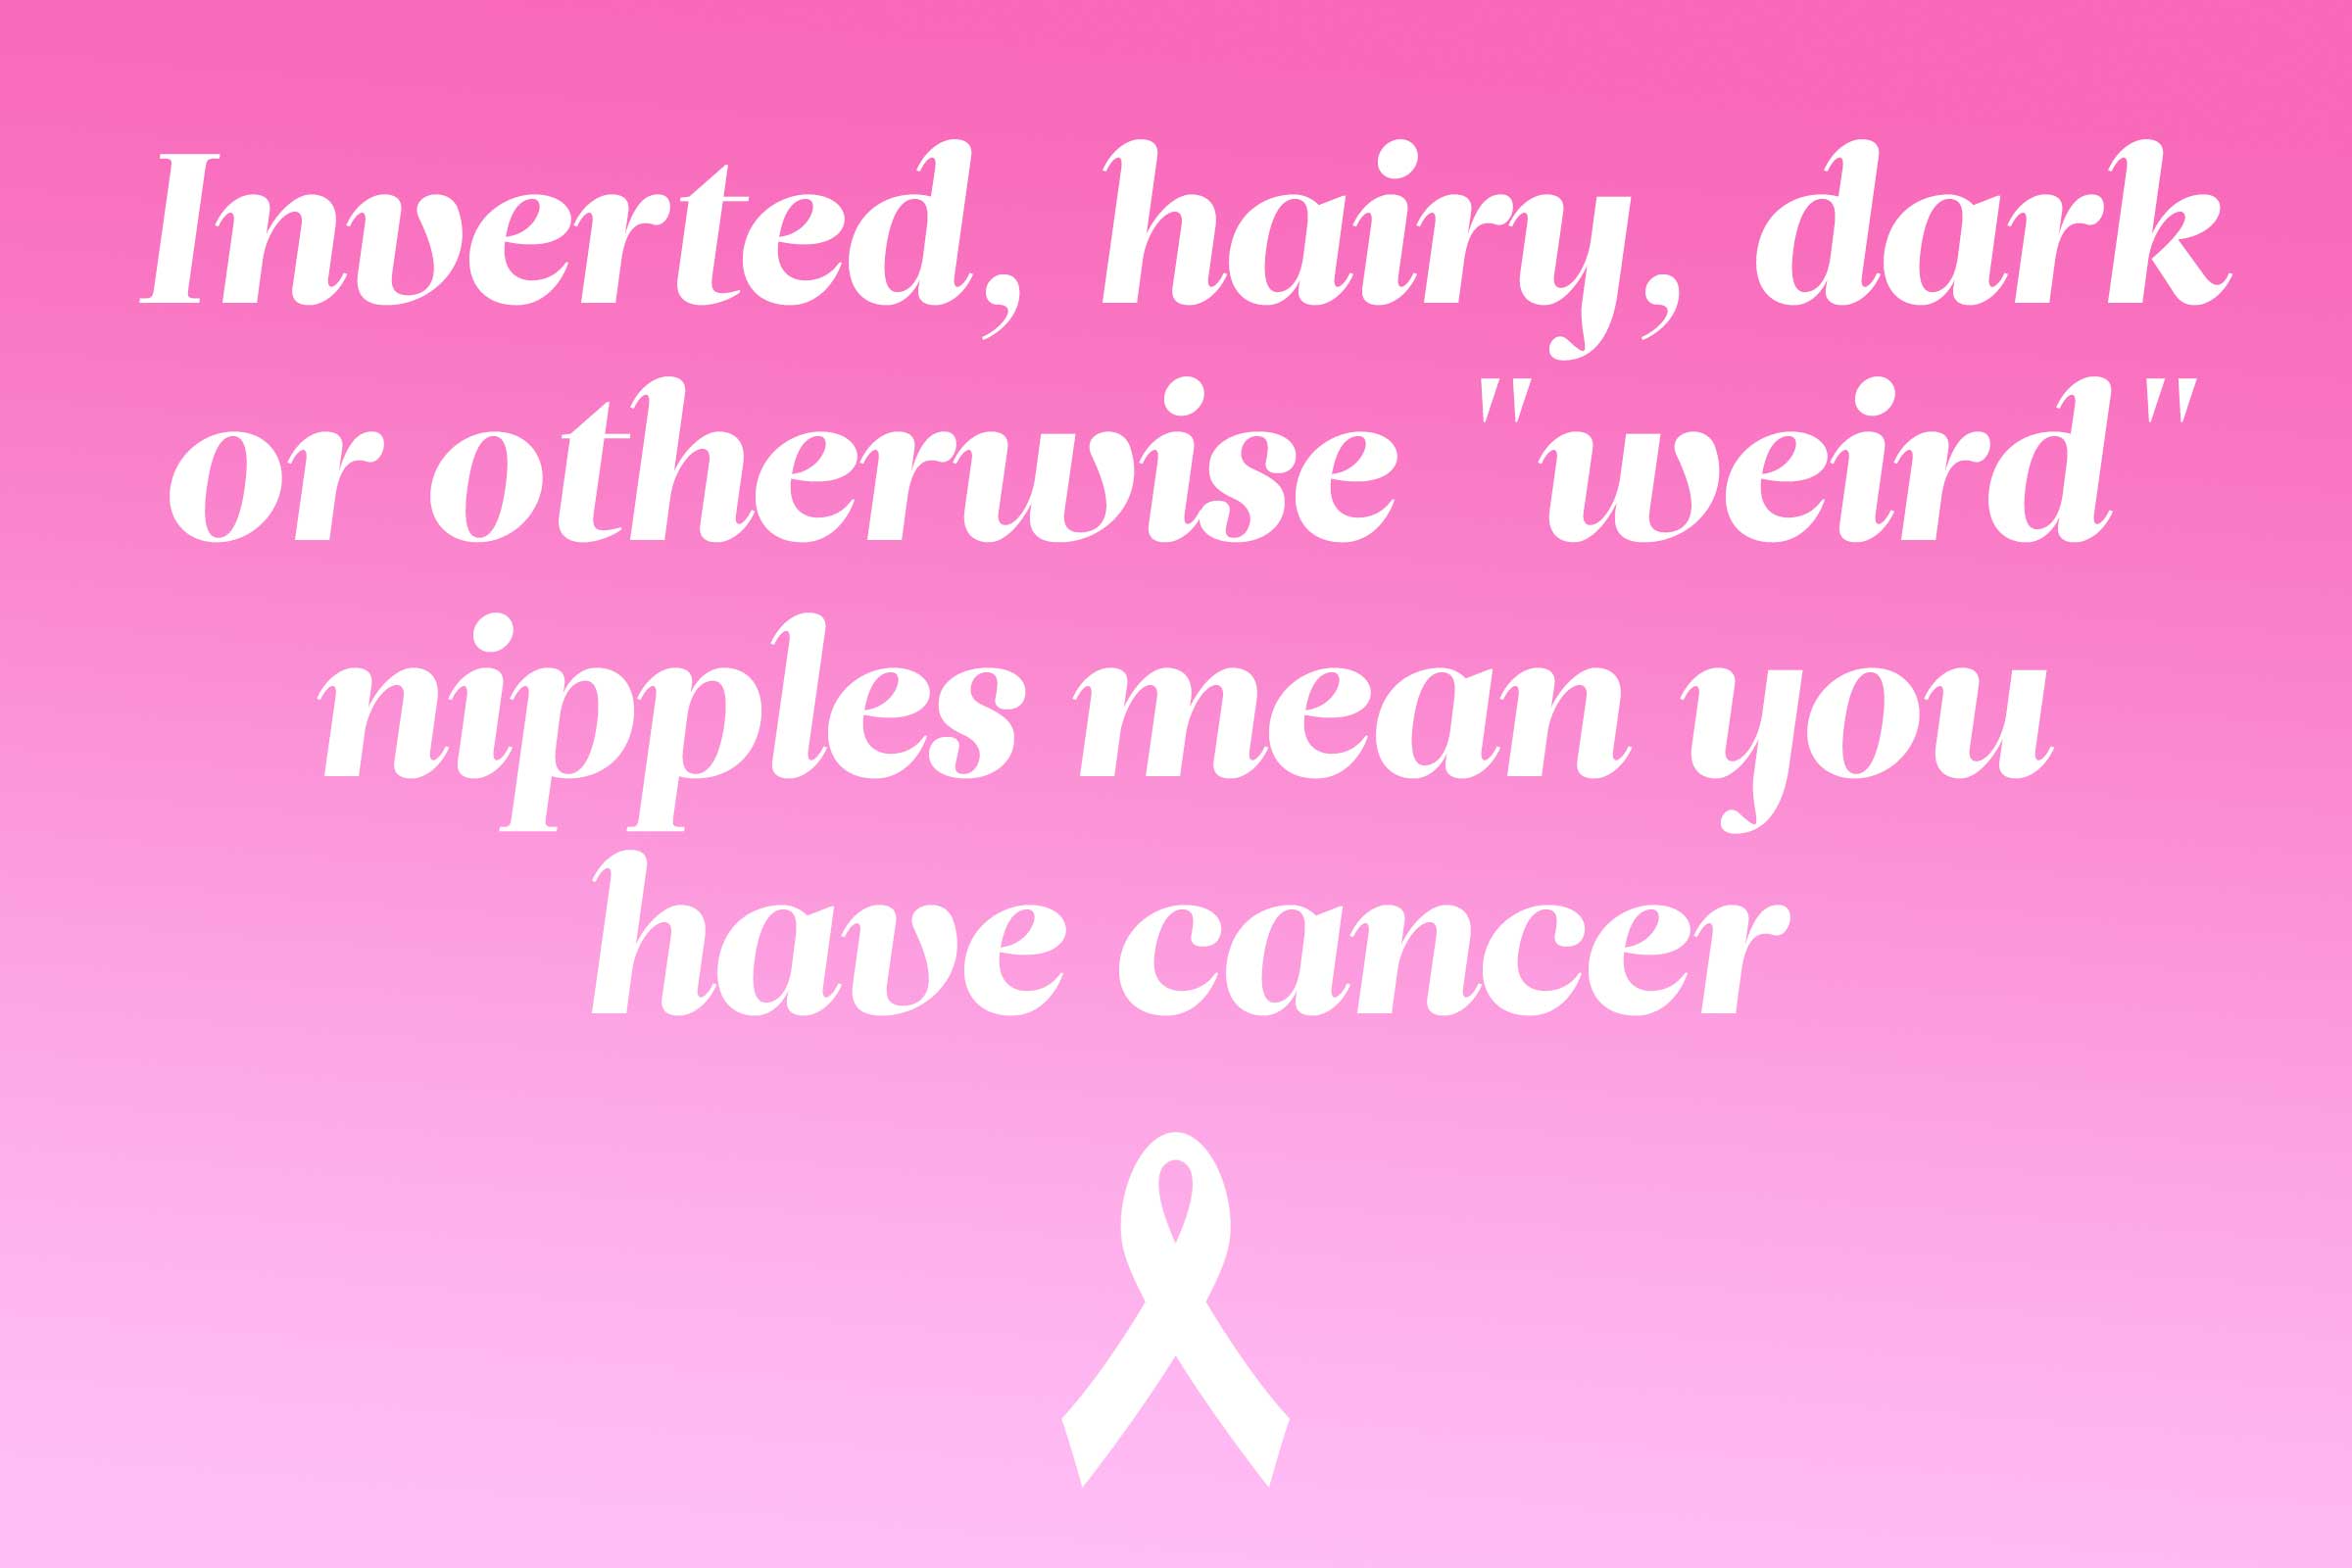 myth: inverted, hair, dark or otherwise "weird" nipples mean you have cancer